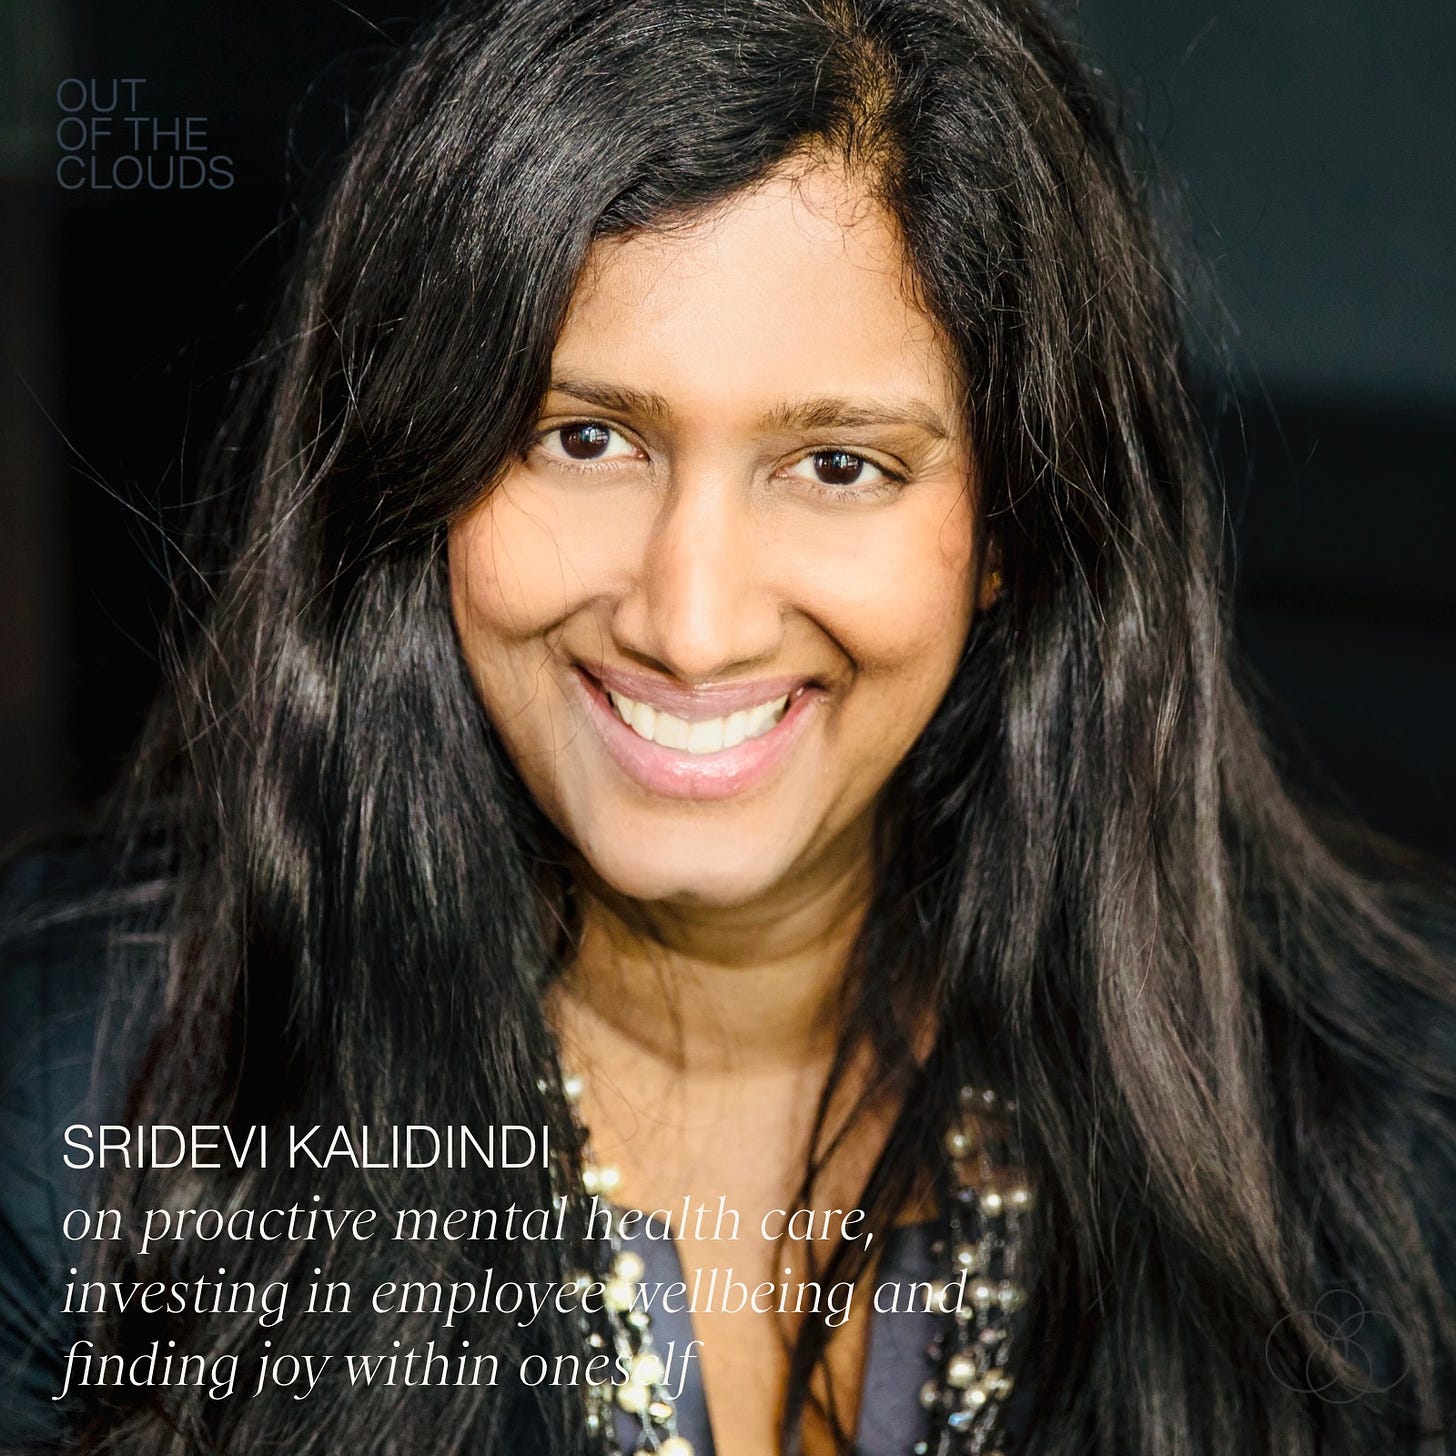 Sridevi Kalidindi of klip Global on the Out of the Clouds podcast